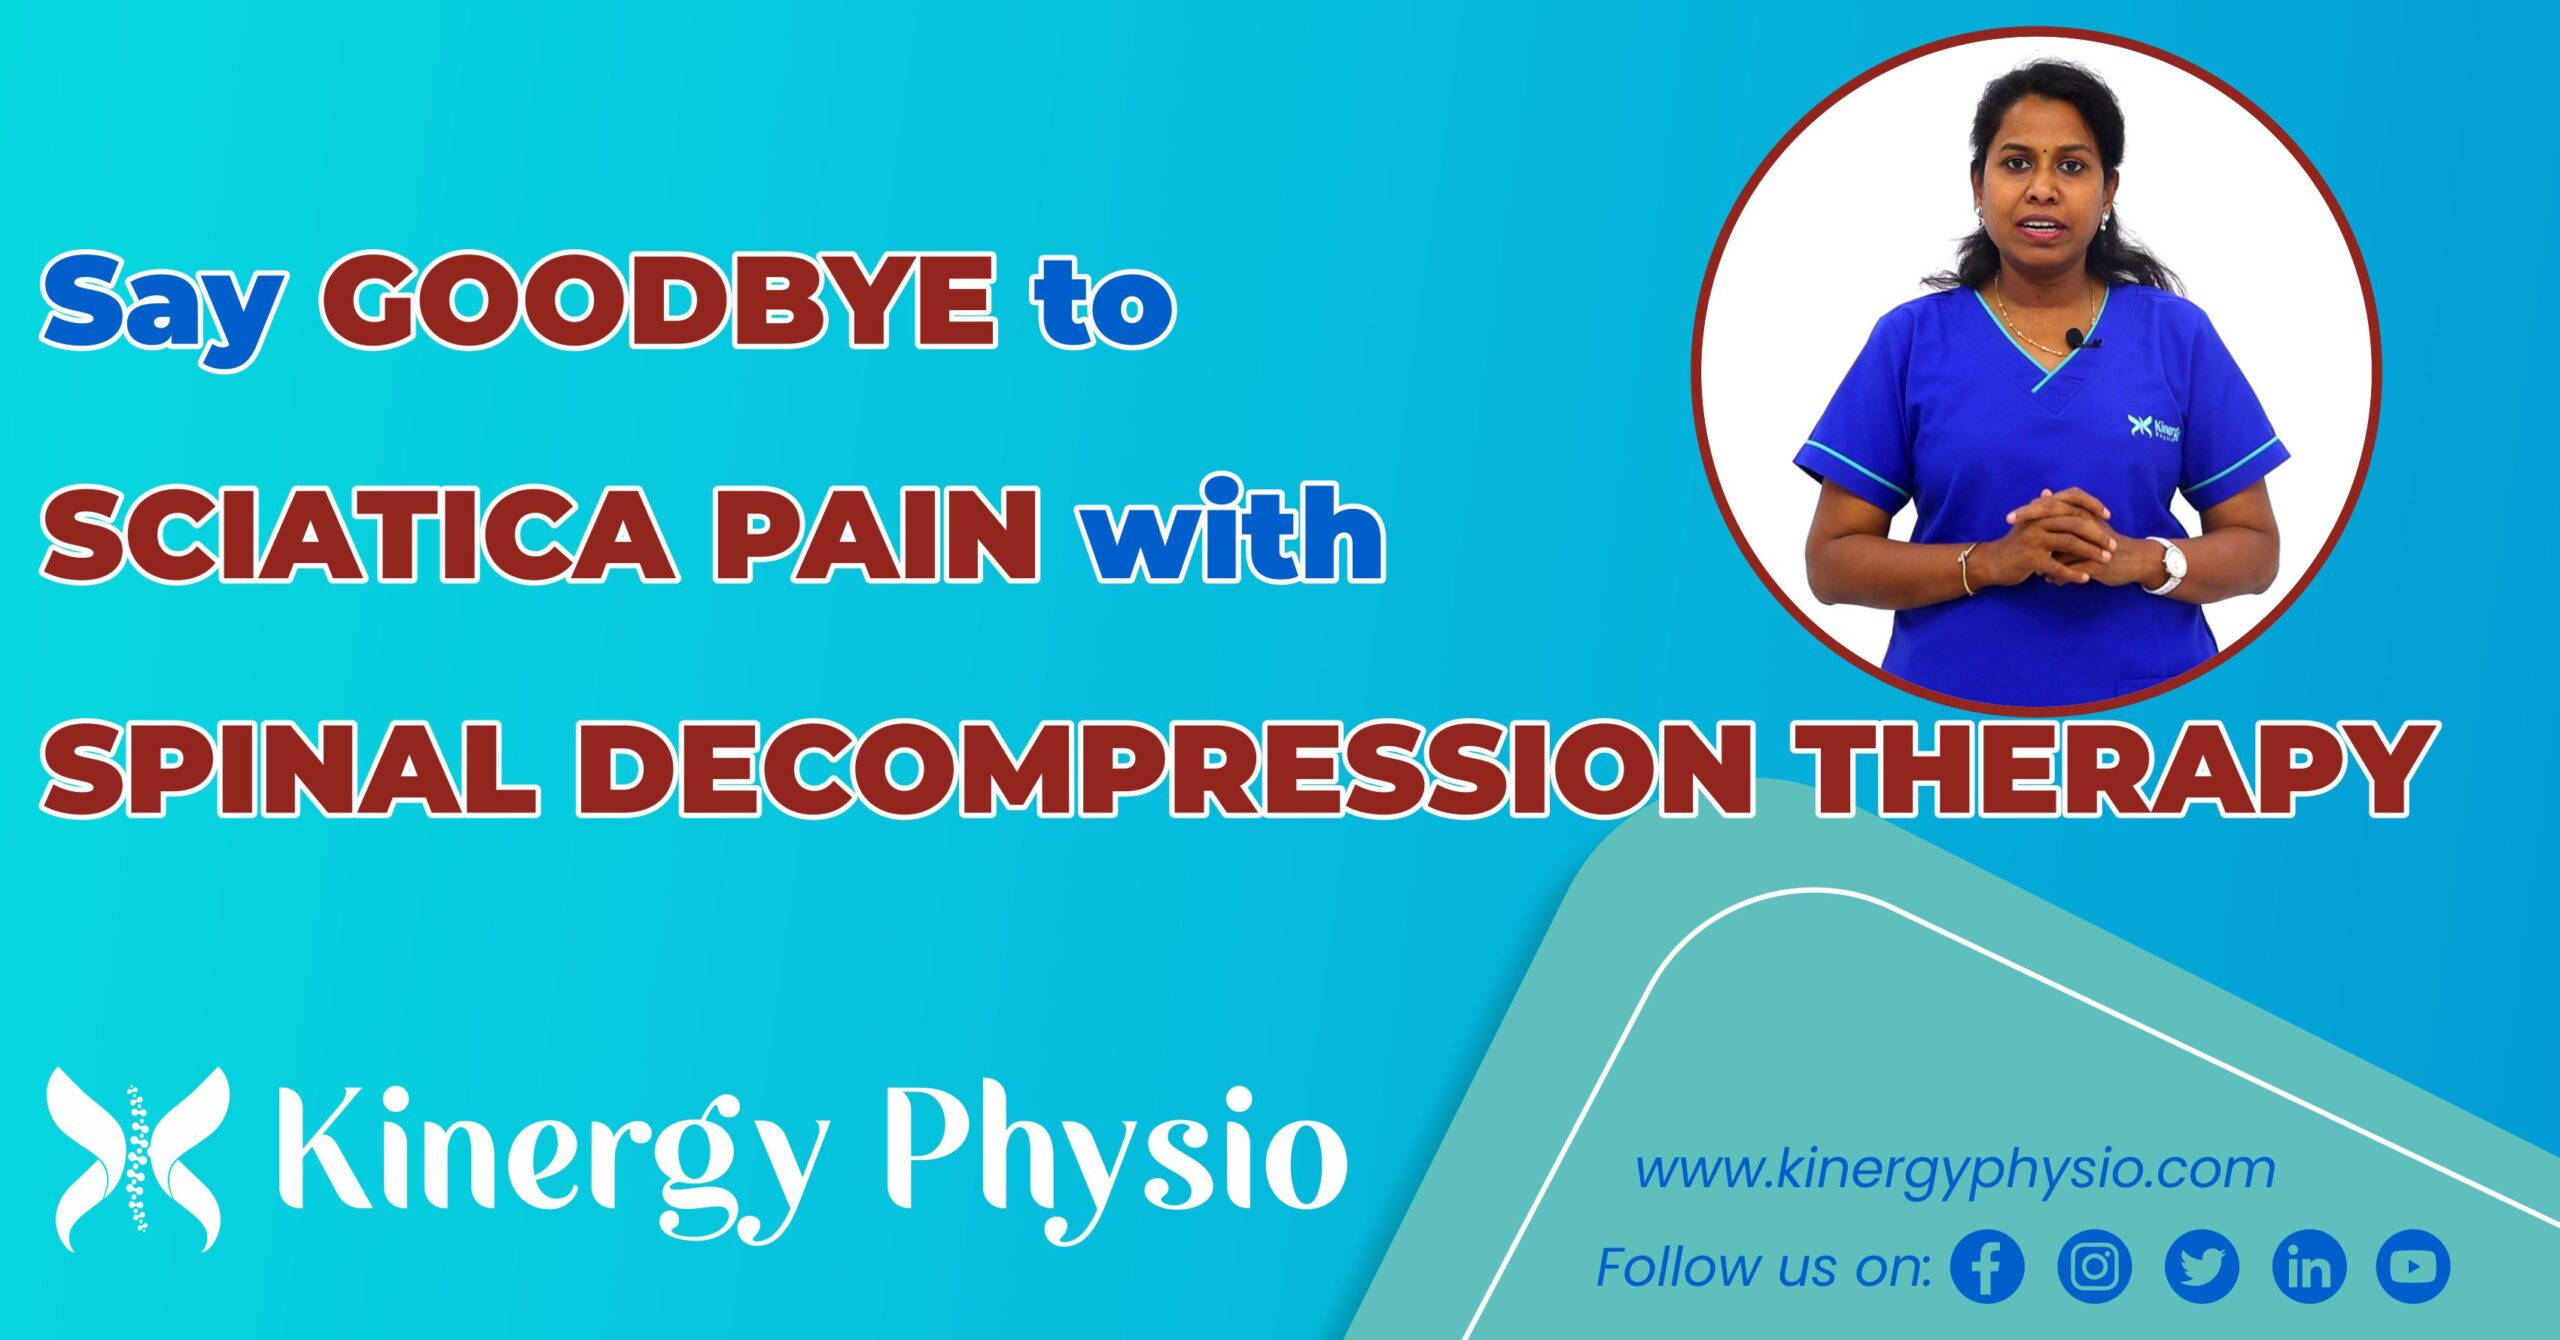 Say Goodbye to Sciatica Pain with Spinal Decompression Therapy